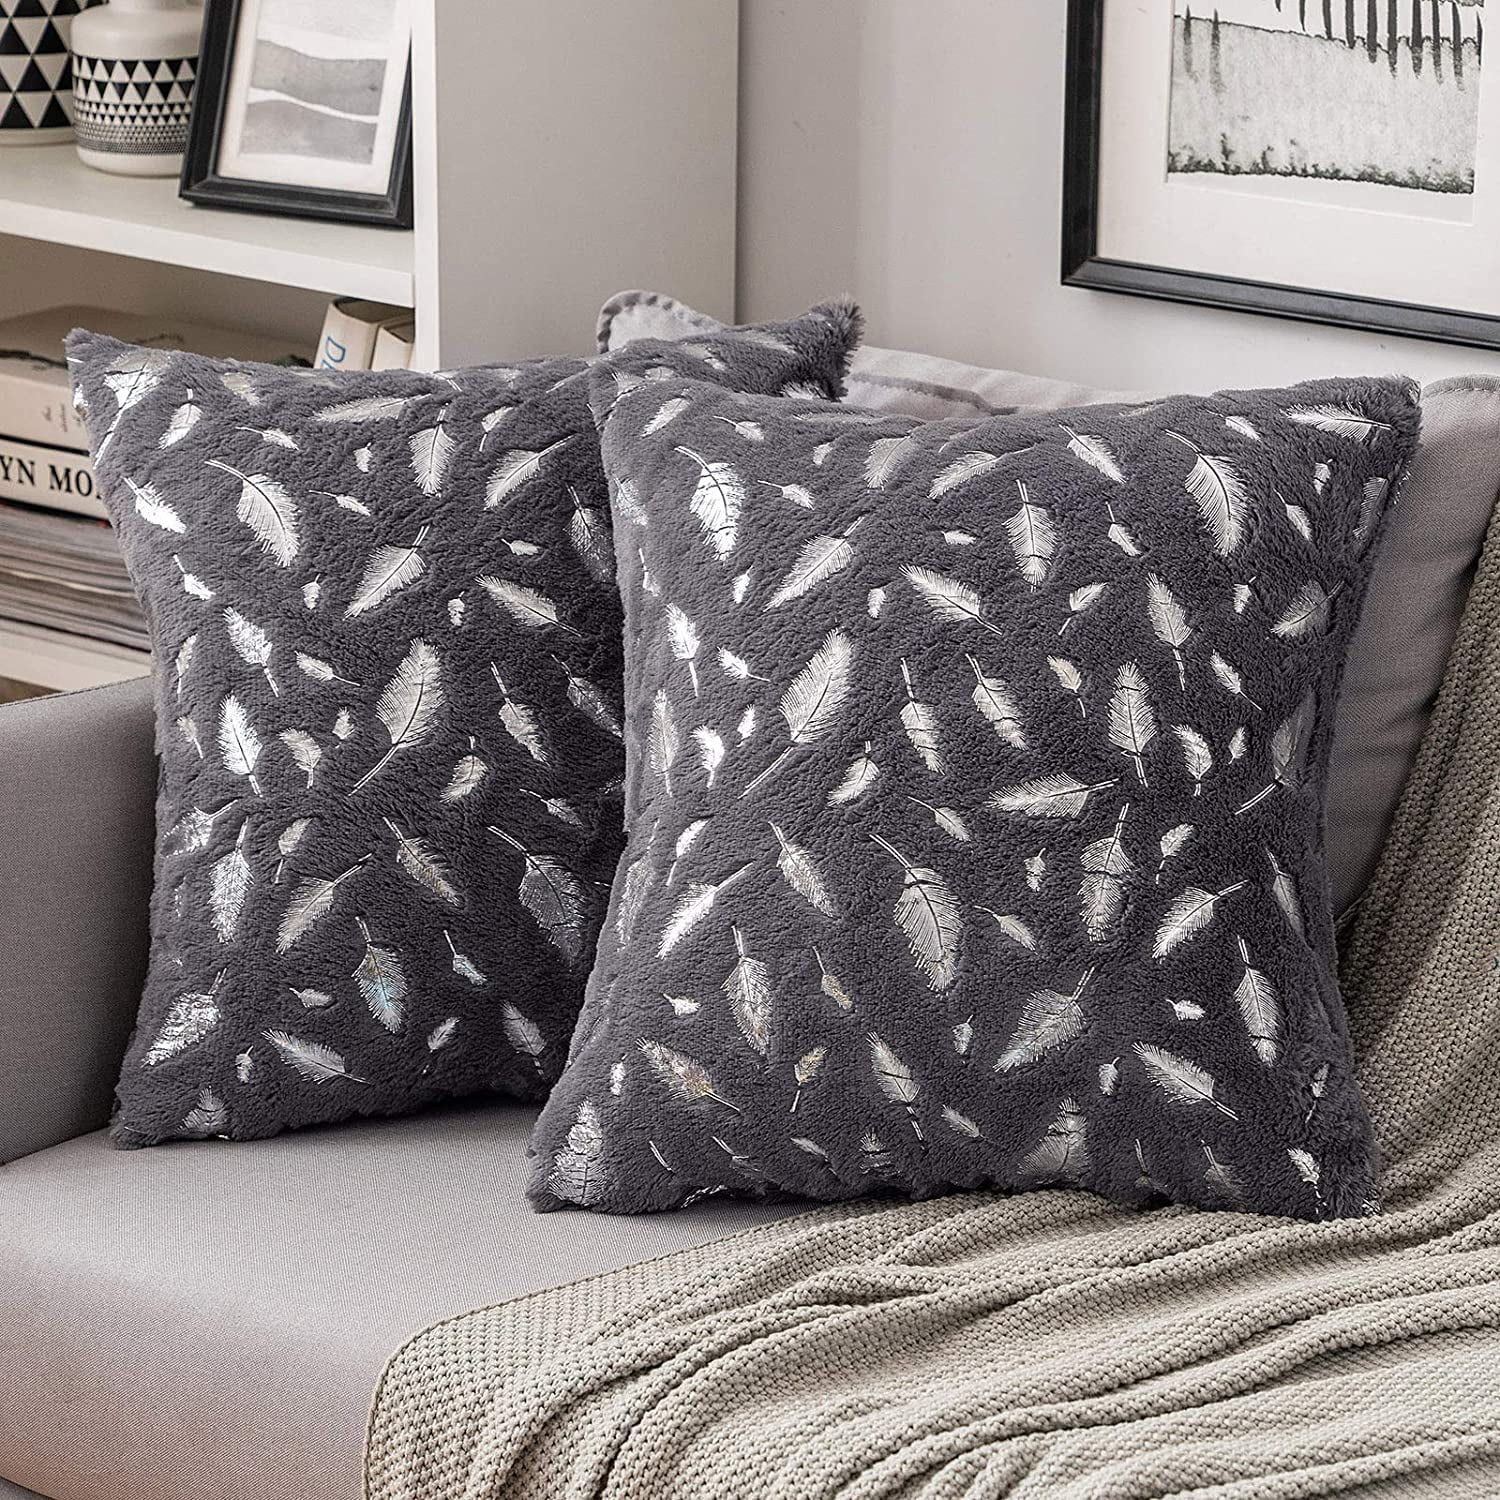 MIULEE Pack of 2 Decorative Faux Leather Modern Pillow Covers Square Luxury Cushion Case Durable Throw Pillow Cover Shell for Couch Sofa Bed Living Room 18x18 Inch Grey